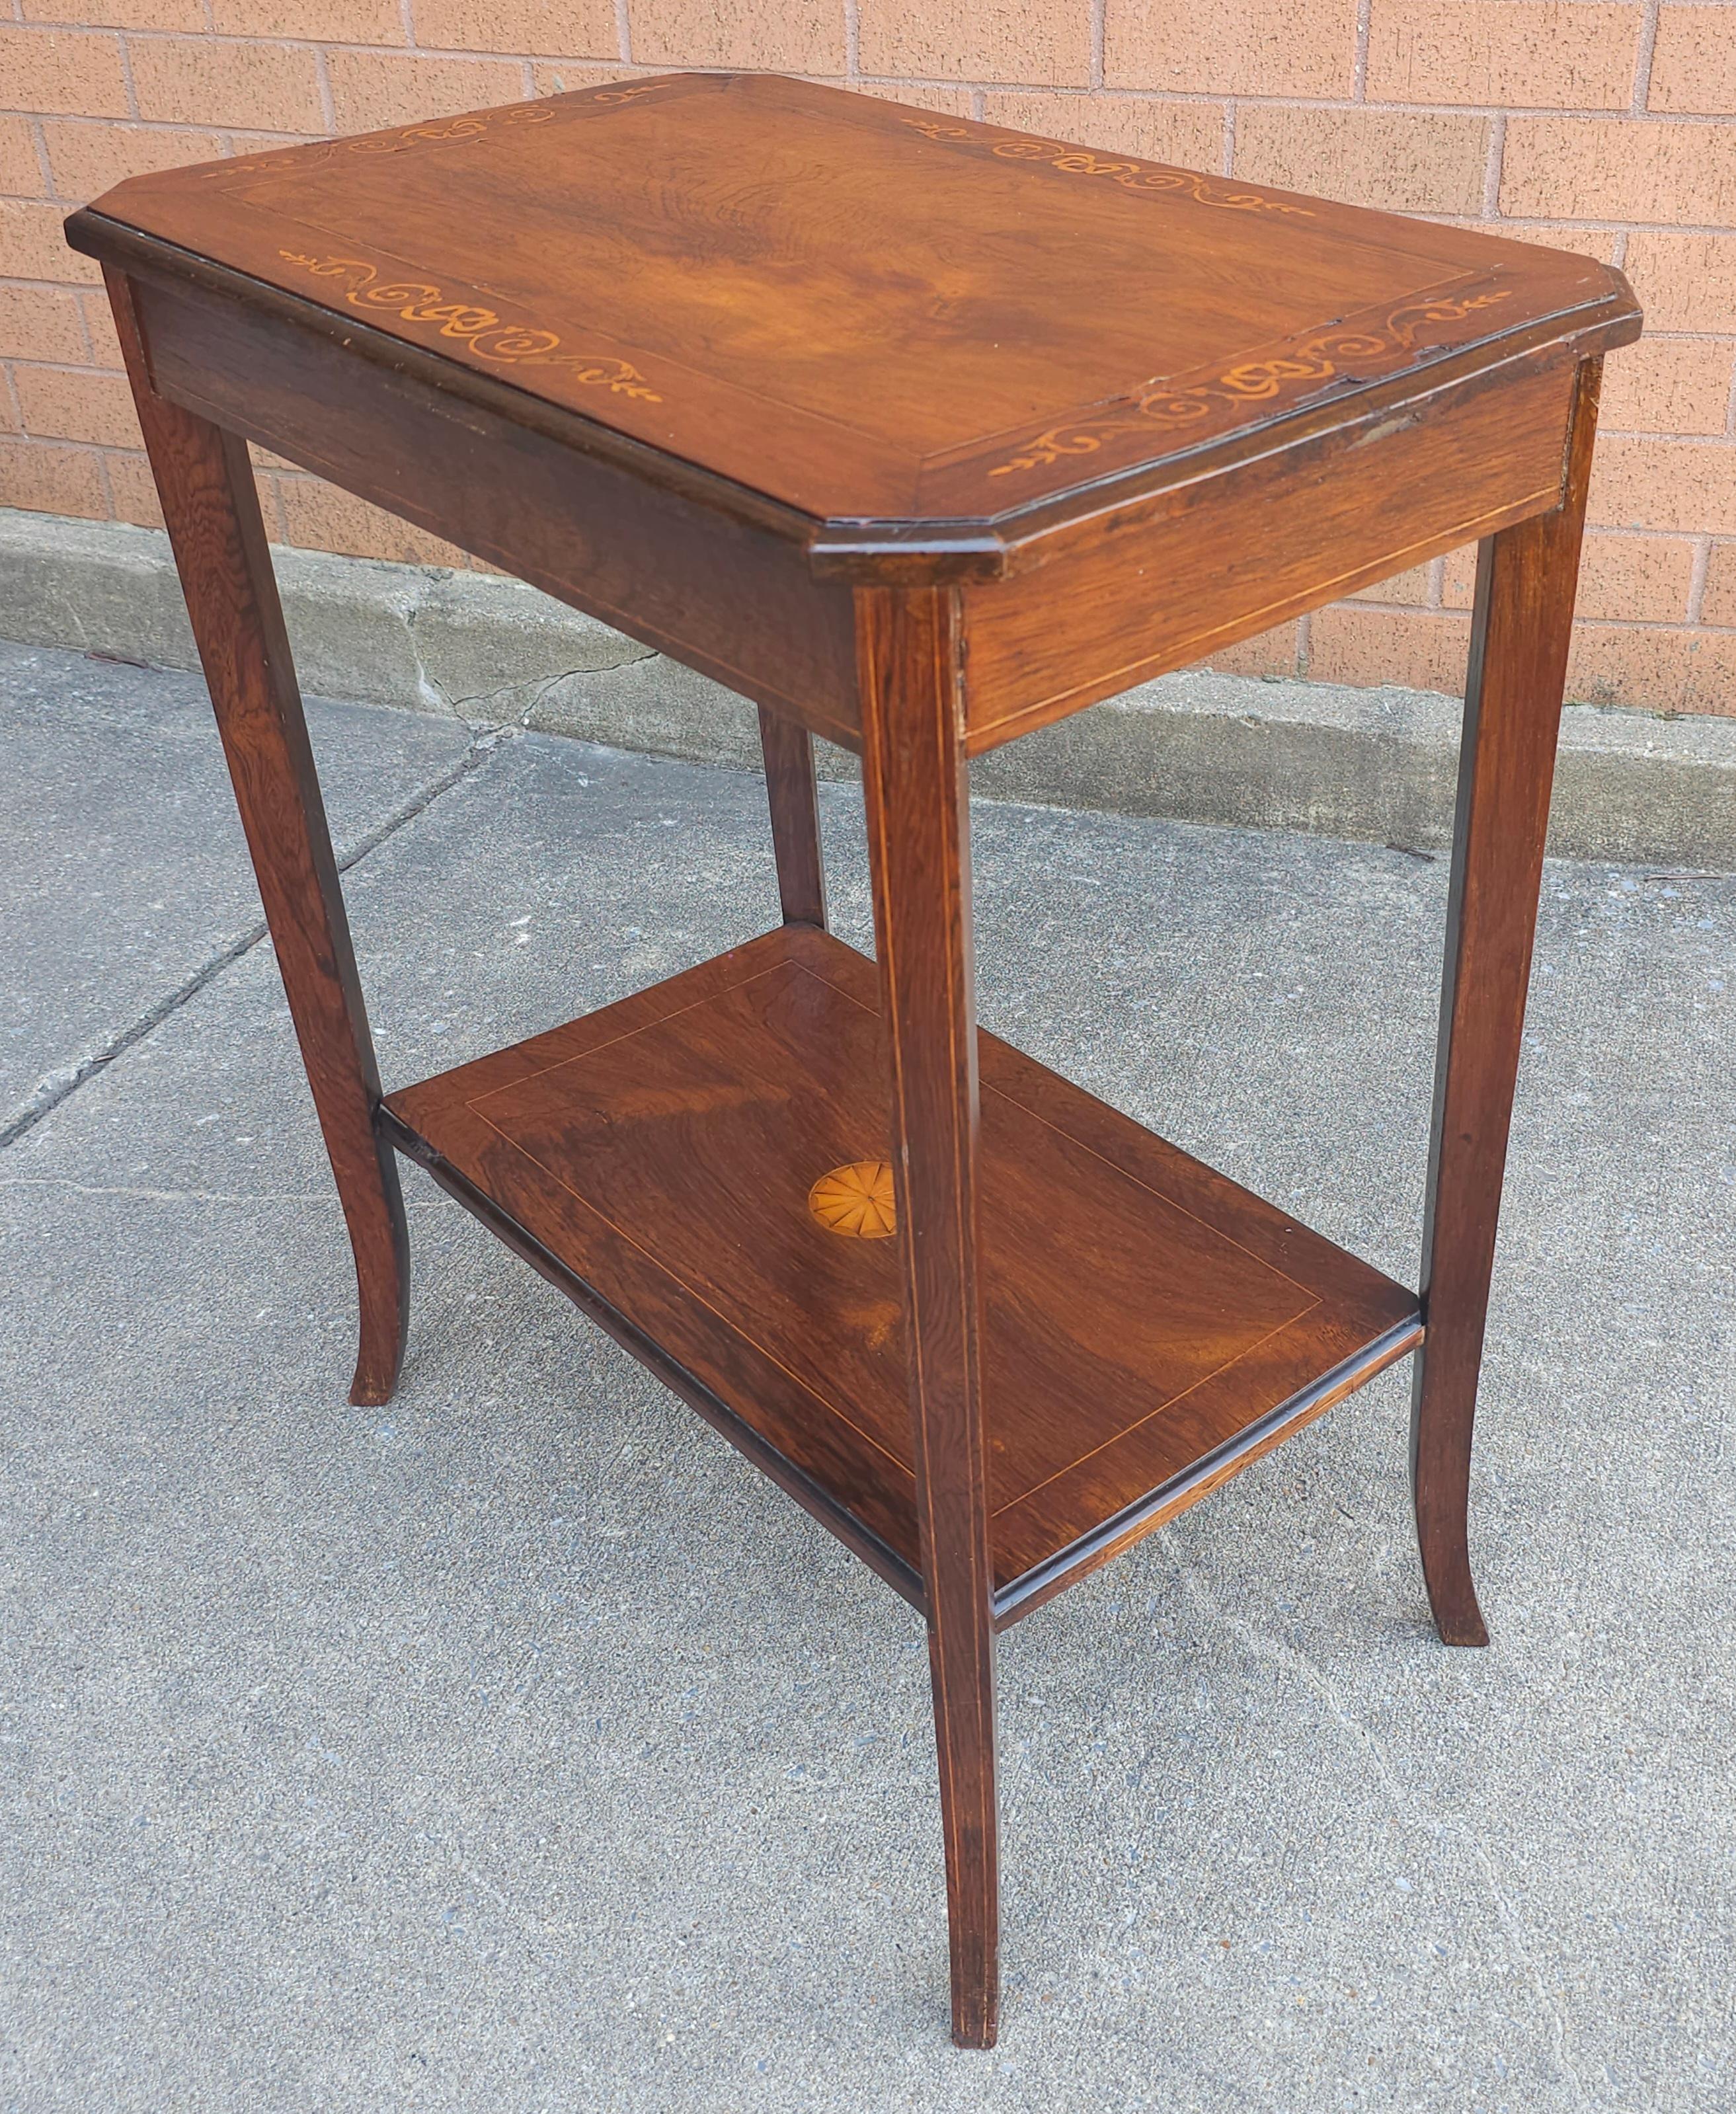 Bois de rose Early 20th C. Edwardian Rosewood Marquetry Inlaid  Table d'appoint en vente